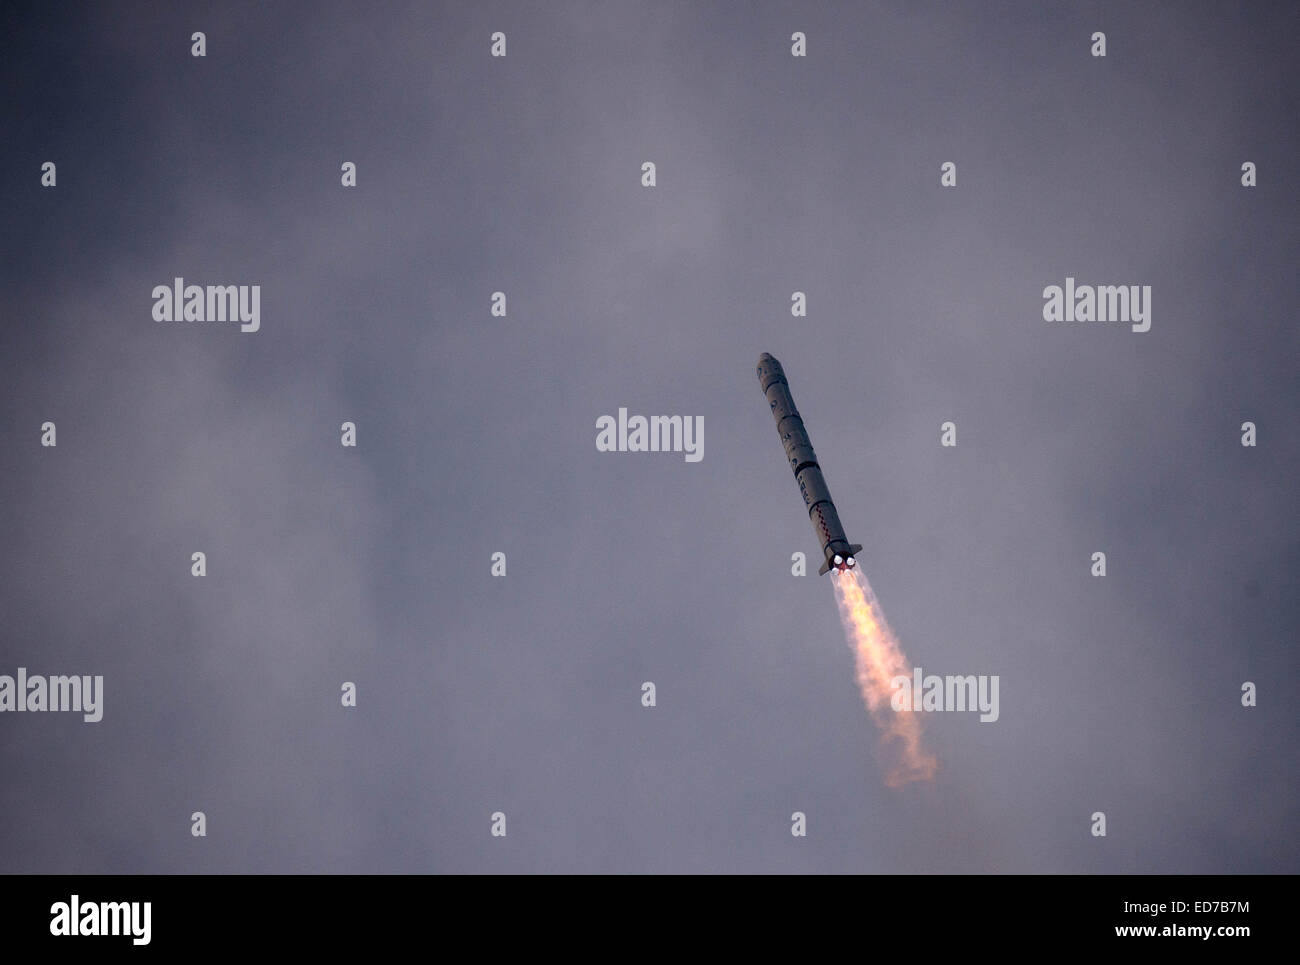 Xichang, China's Sichuan Province. 31st Dec, 2014. A Long March 3A rocket carrying meteorological satellite Fengyun-II 08 blasts off from the launching pad at Xichang Satellite Launch Center, southwest China's Sichuan Province, Dec. 31, 2014. China successfully launched Fengyun-II 08, its meteorological satellite, at 9:02 a.m. on Wednesday. The satellite will collect meteorological, maritime and hydrological data; and transmit information that will be used for weather forecasting and environment monitoring. Credit:  Liu Chan/Xinhua/Alamy Live News Stock Photo